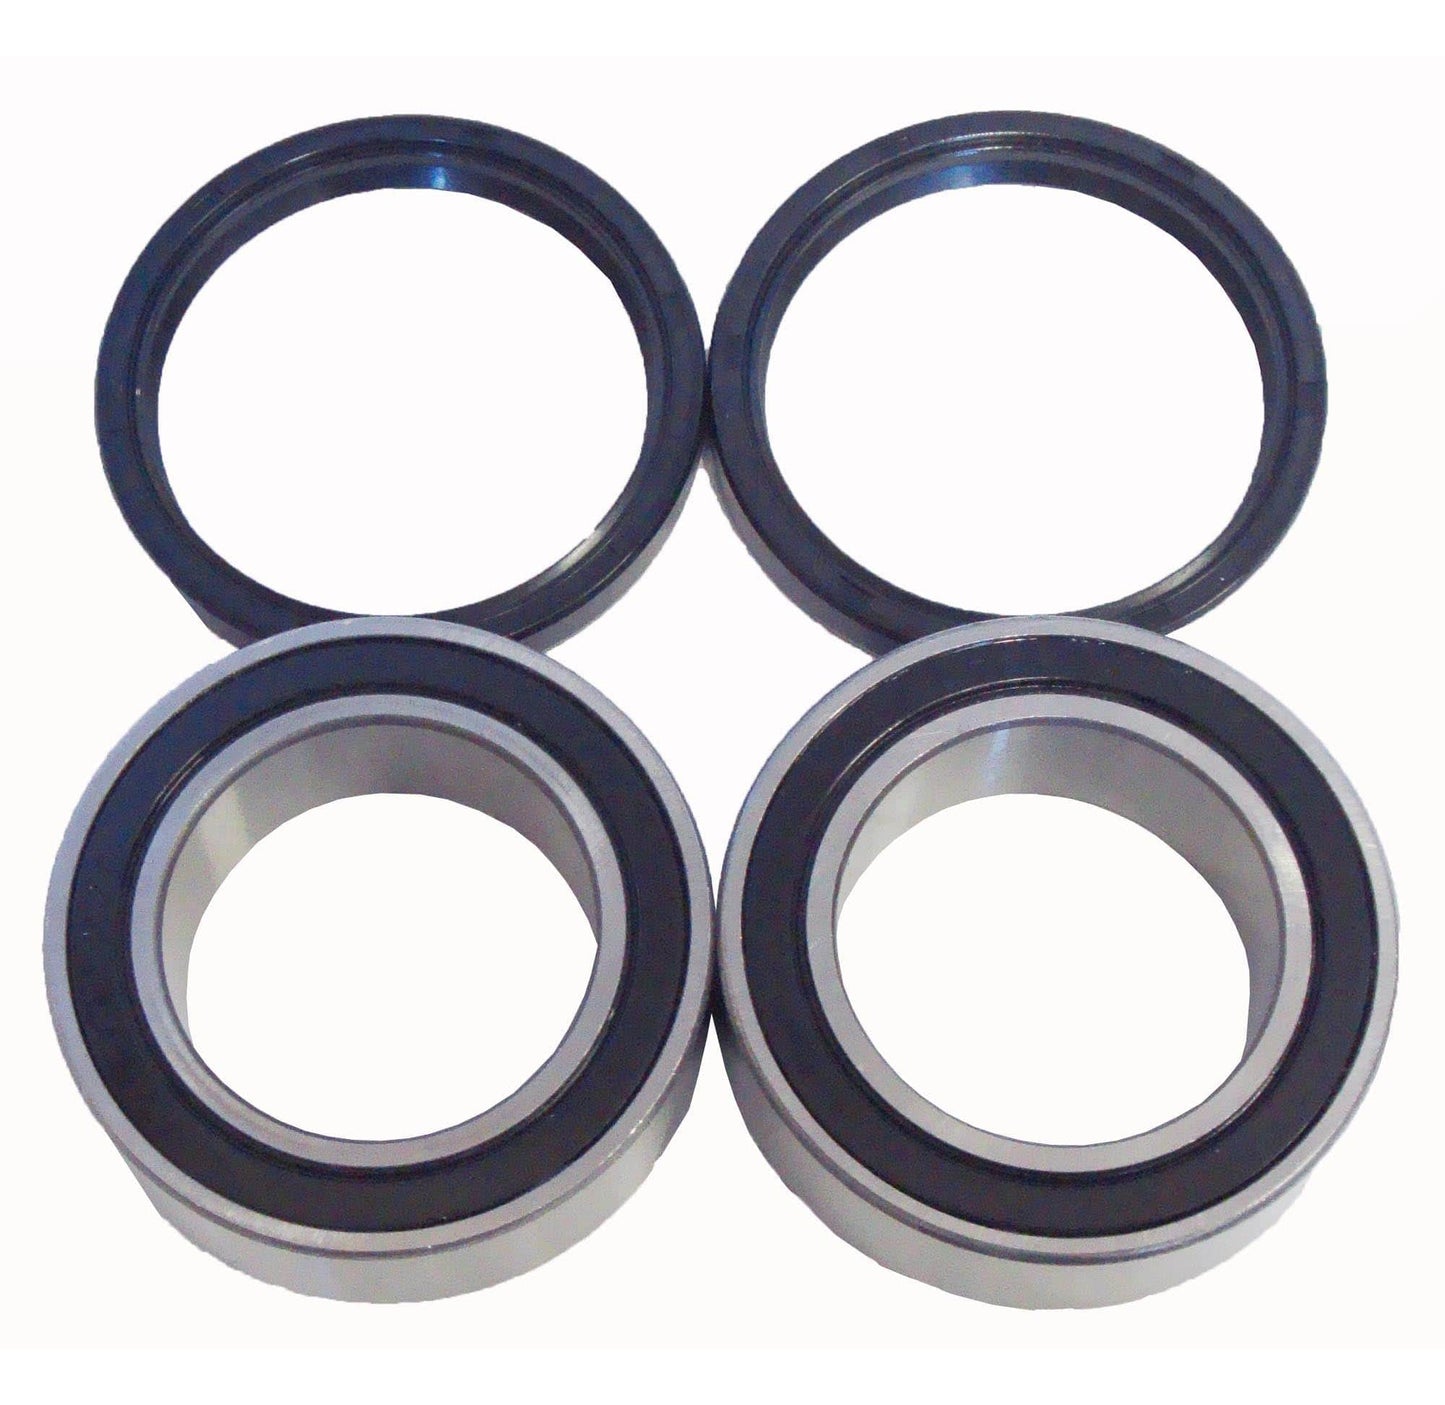 Modquad Swing Arm Bearing Replacement Set – 35 mm *NEW*